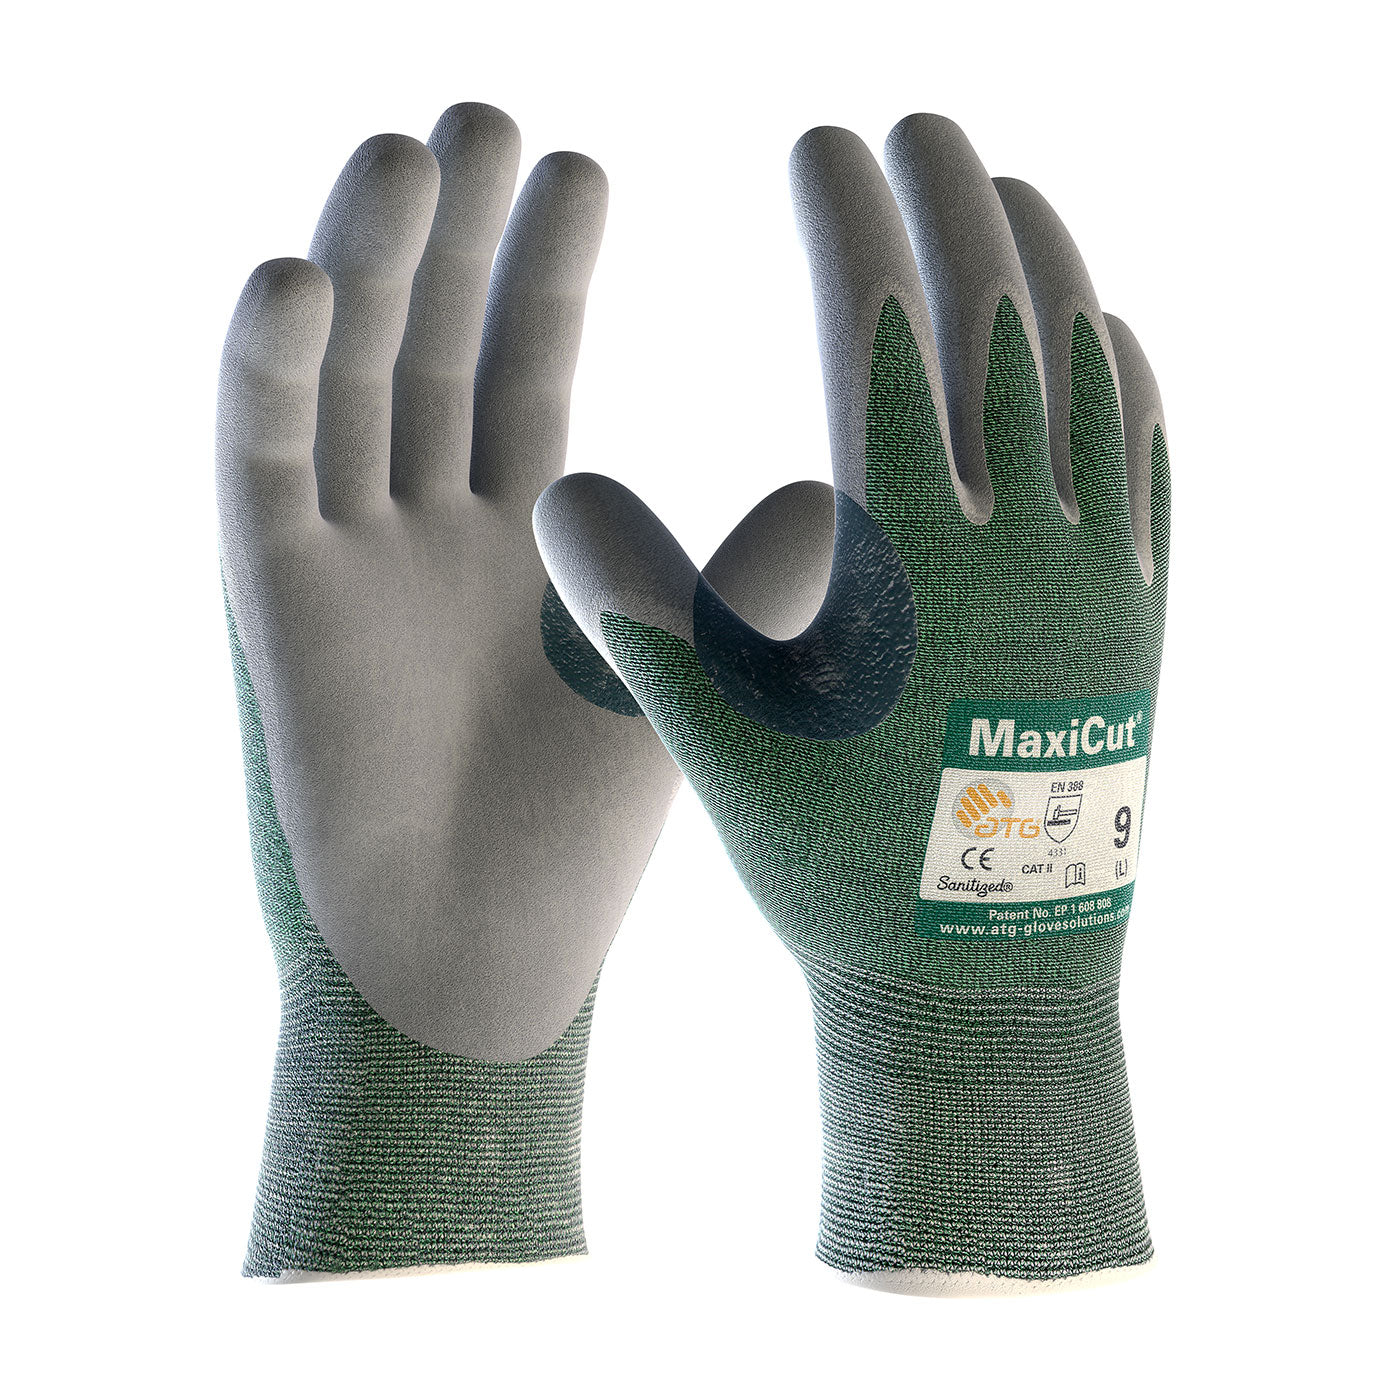 Maxicut Seamless Knit Engineered Yarn Glove With Nitrile Coated Microfoam Grip,Cut Level A2 Sold By Pair-GP18570S